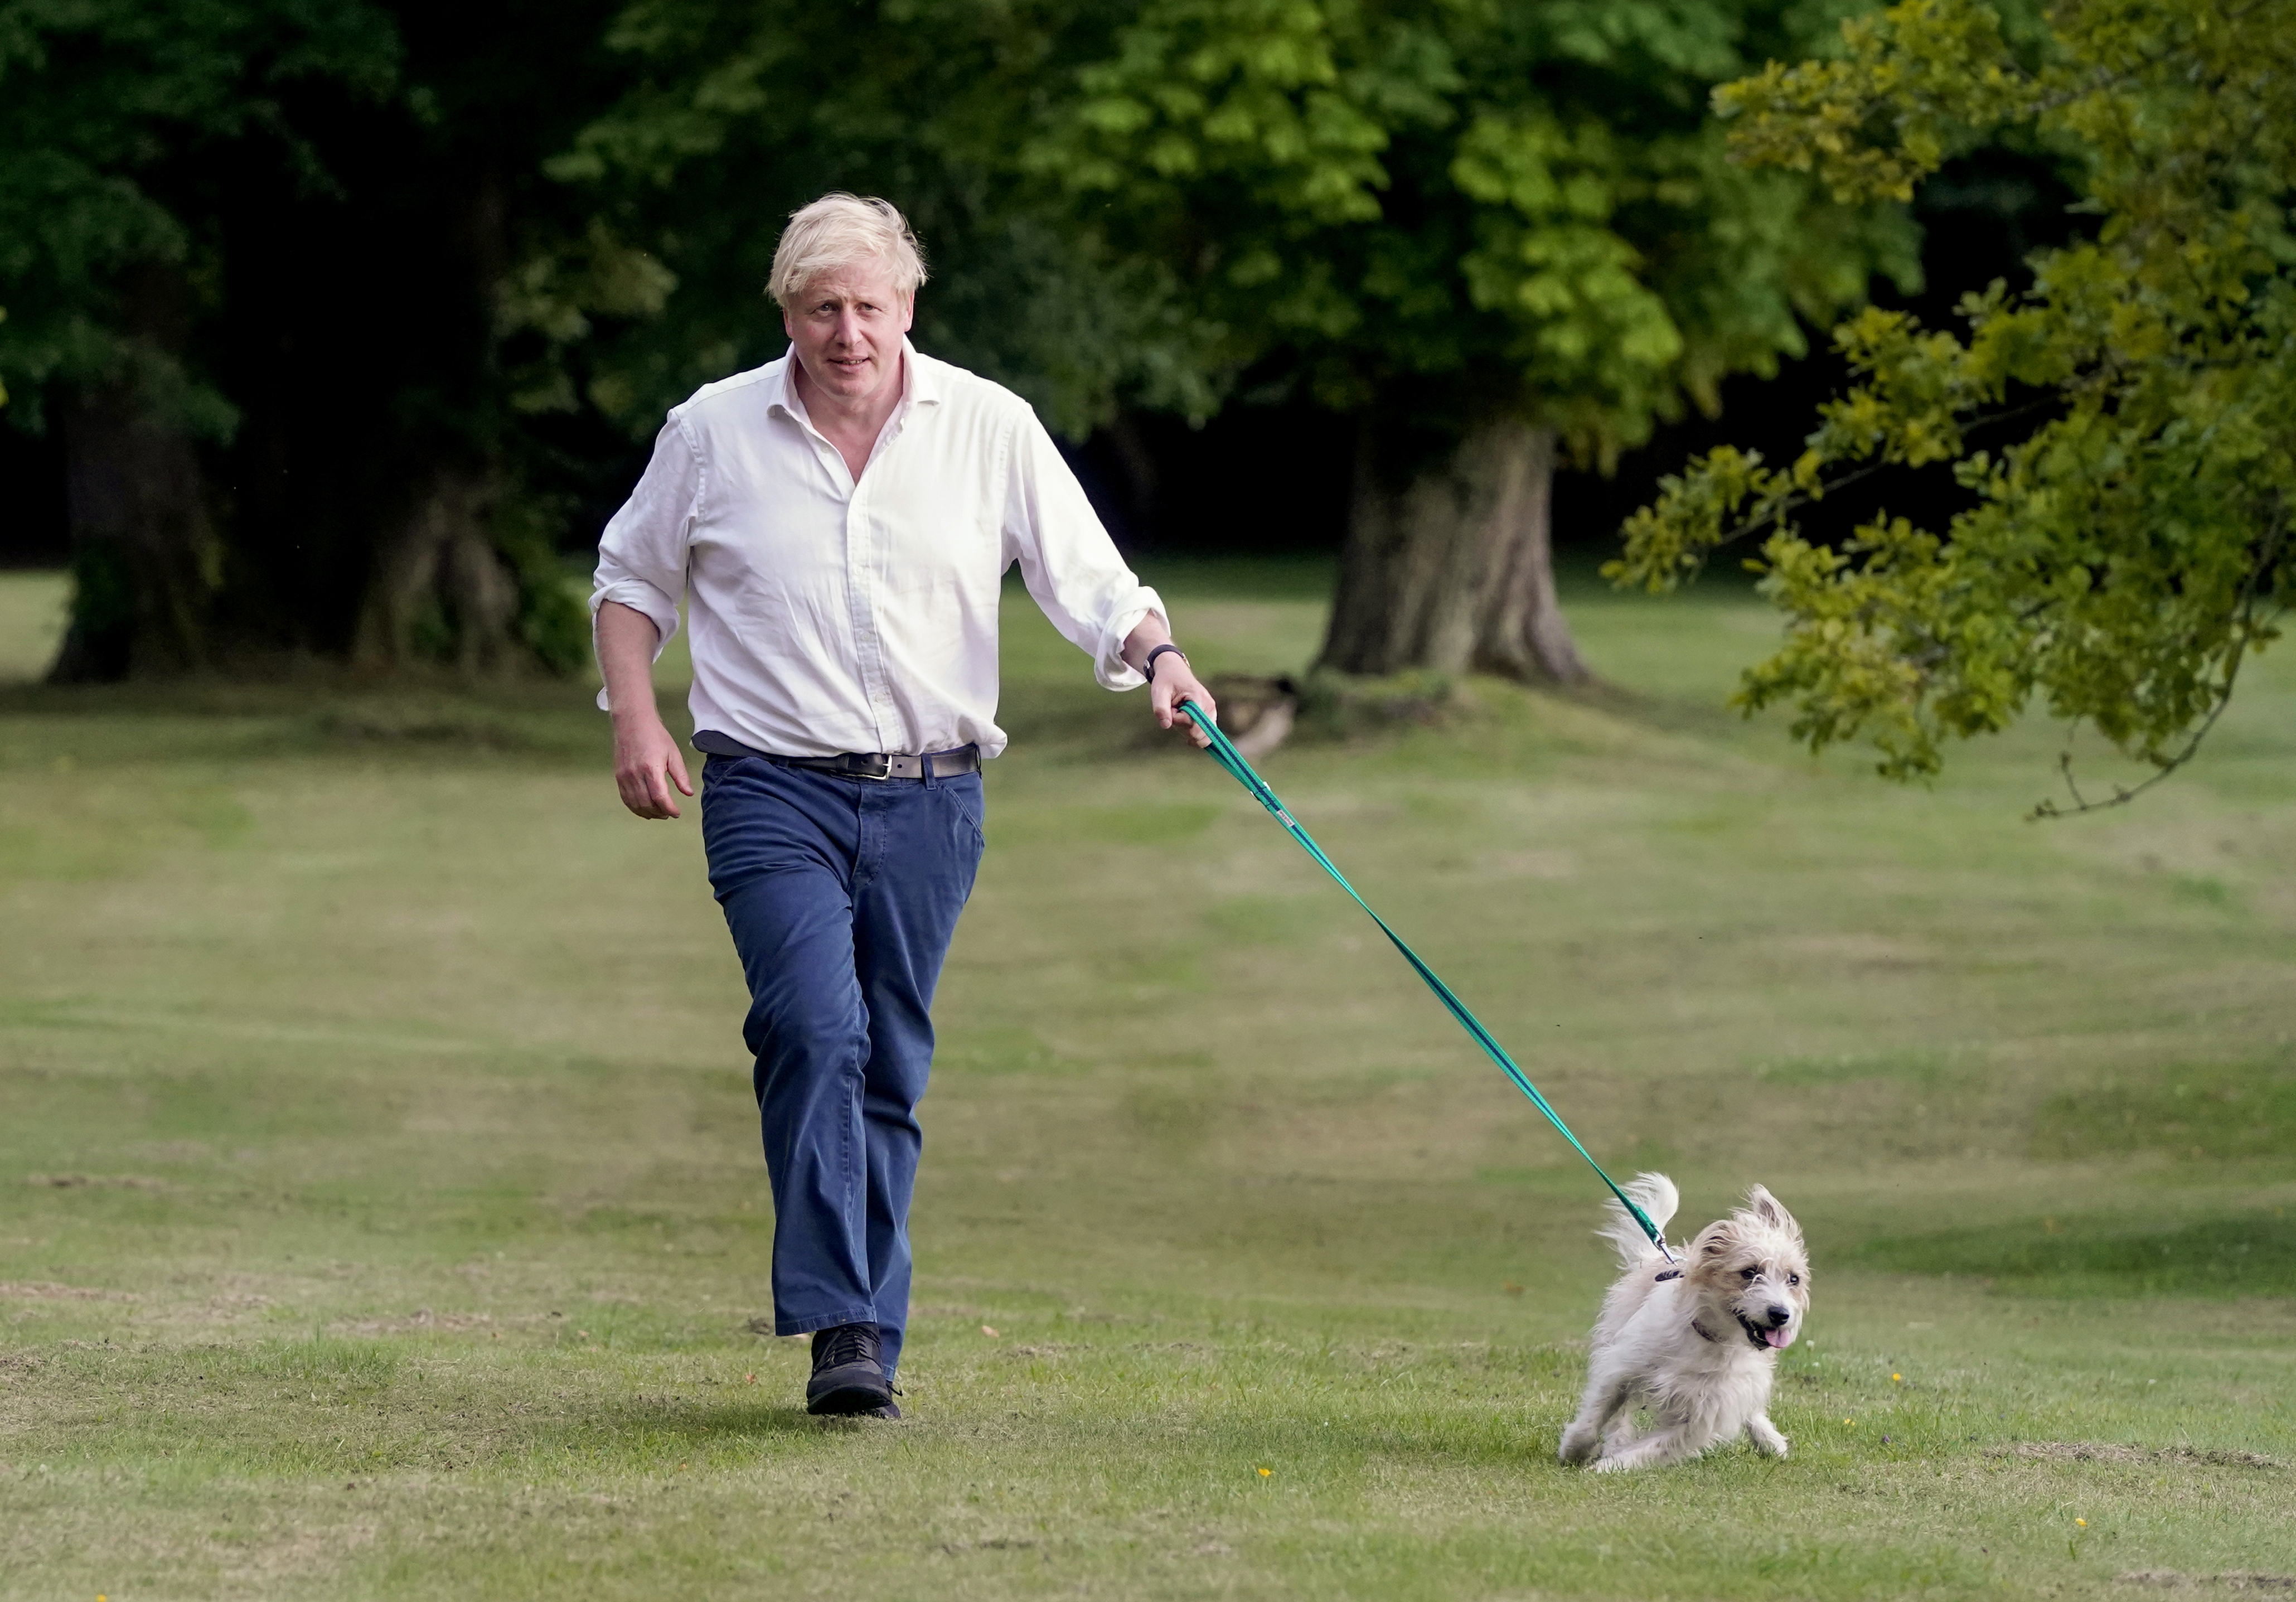 A picture of Boris Johnson with his dog Dilyn taken by taxpayer-funded photographer Andrew Parsons